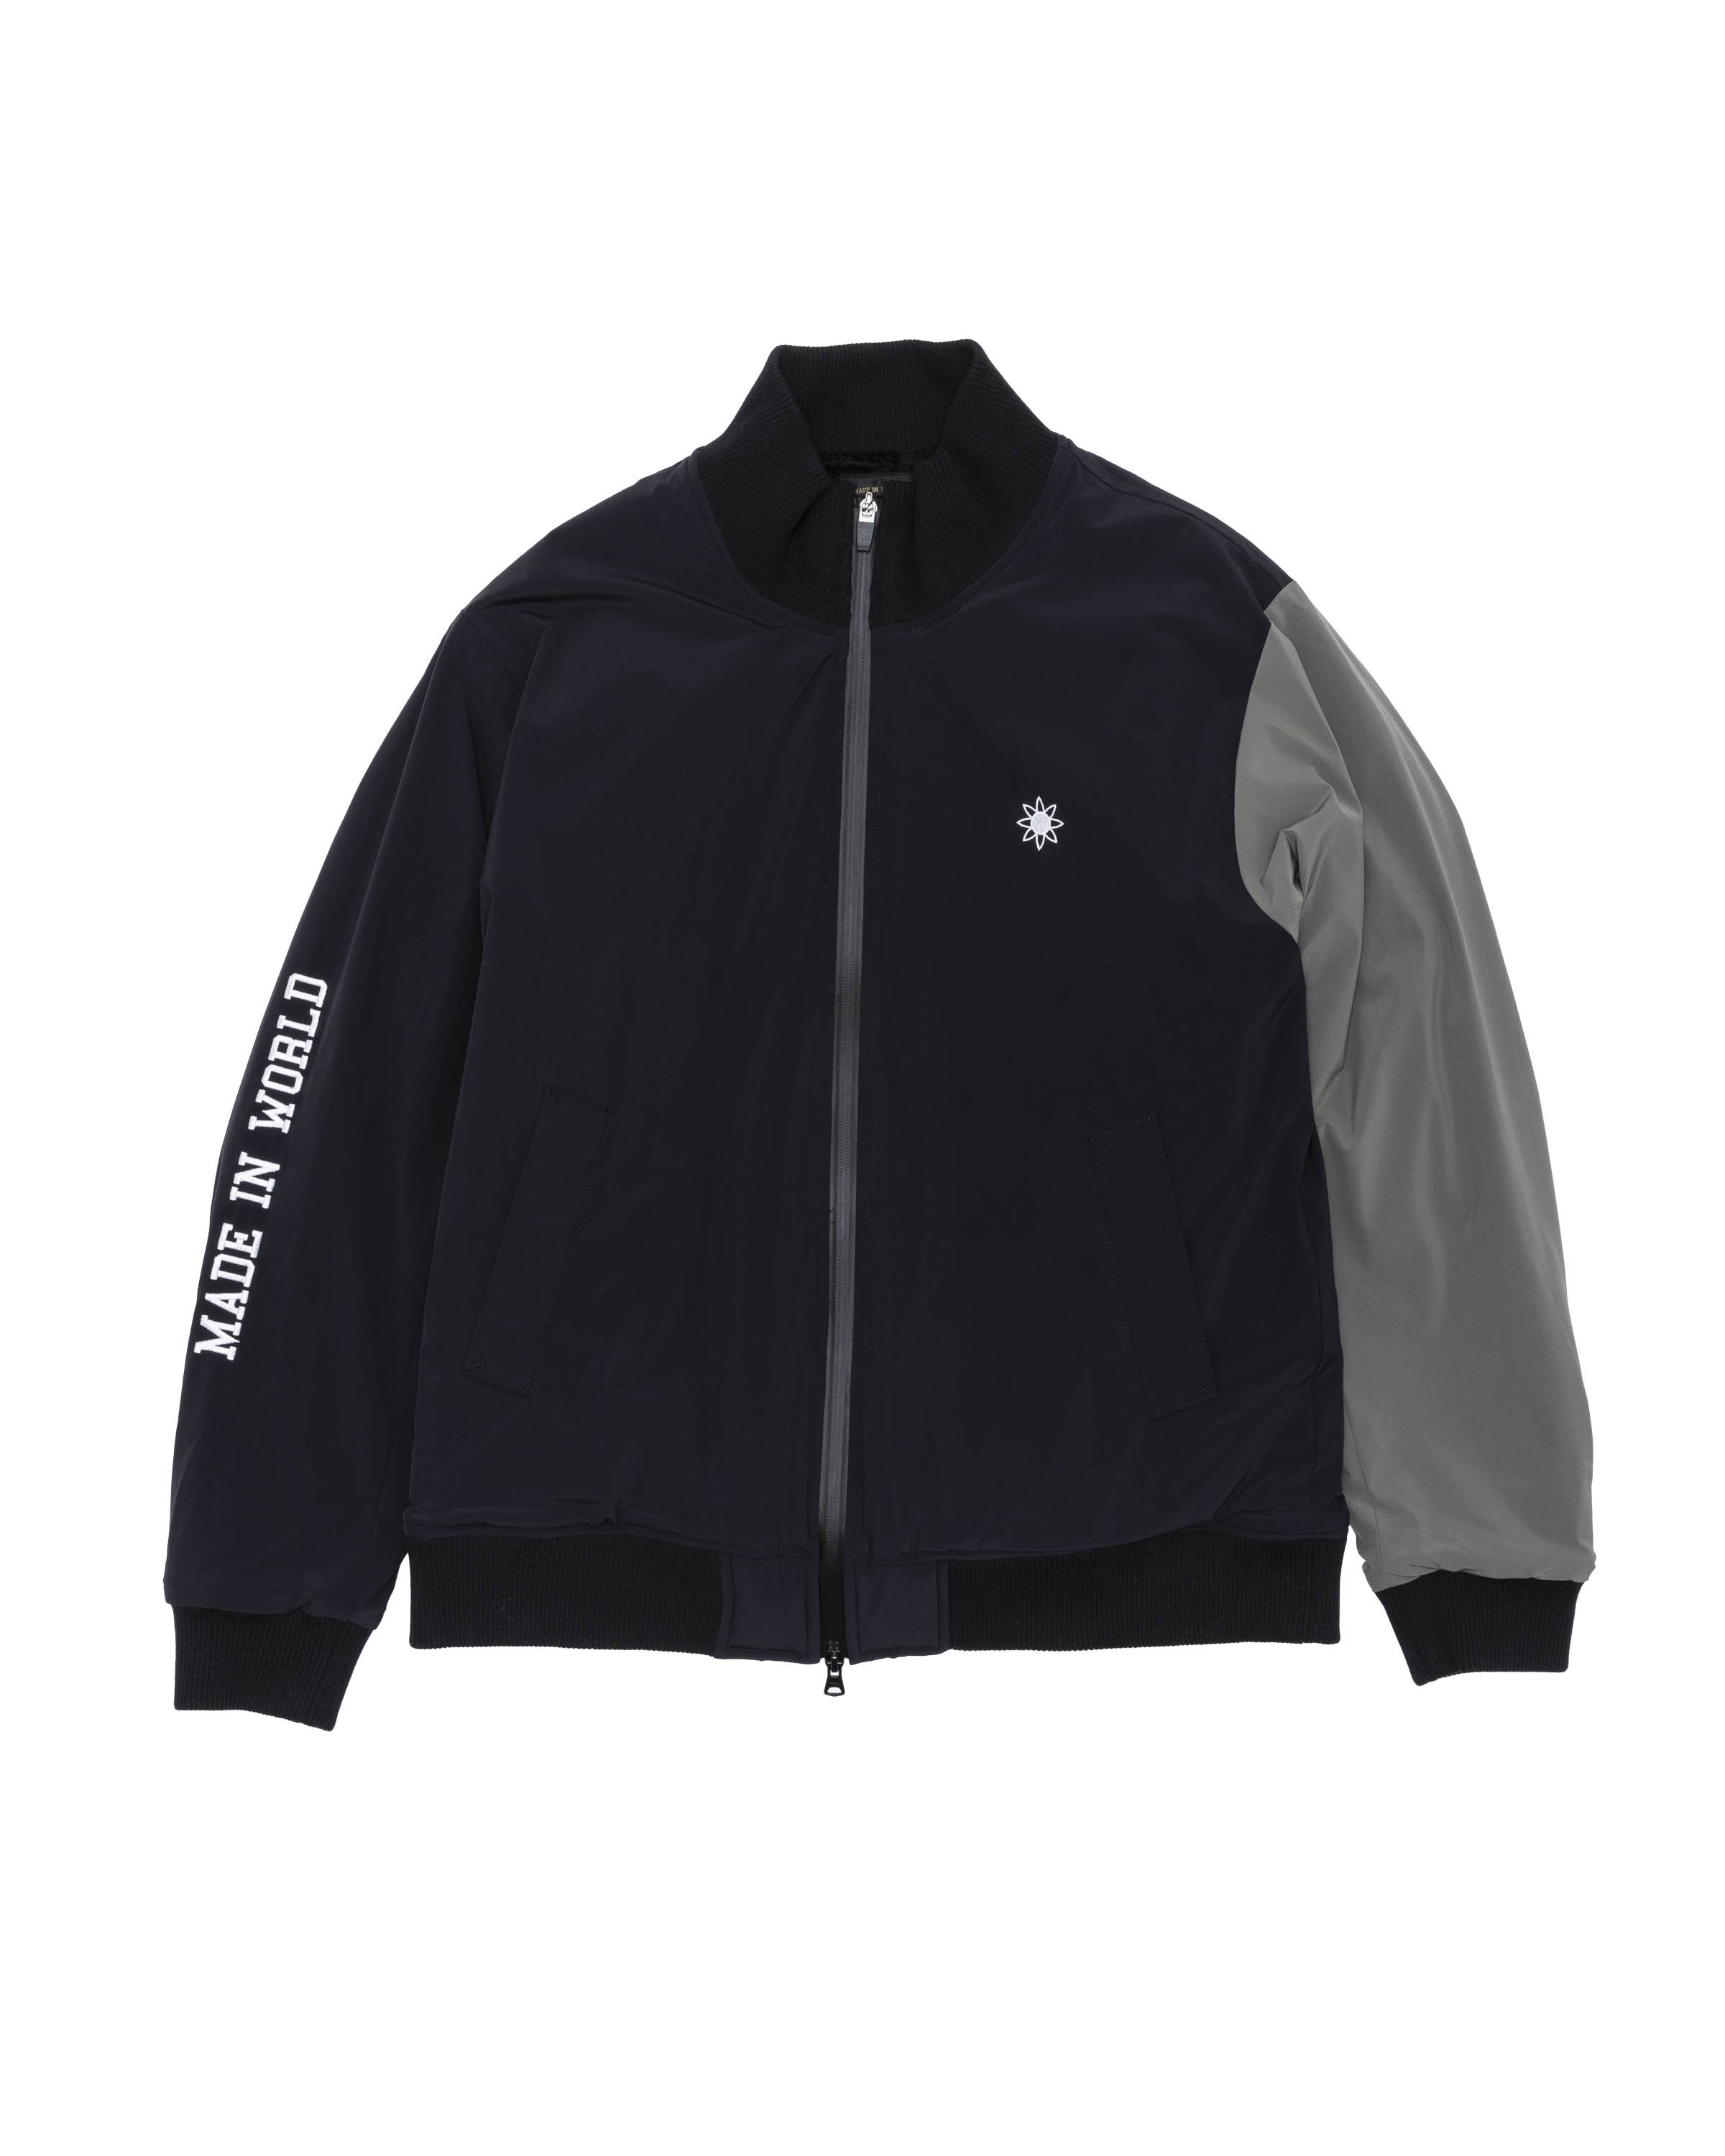 <img class='new_mark_img1' src='https://img.shop-pro.jp/img/new/icons14.gif' style='border:none;display:inline;margin:0px;padding:0px;width:auto;' />FUR BLOUSON<br />black